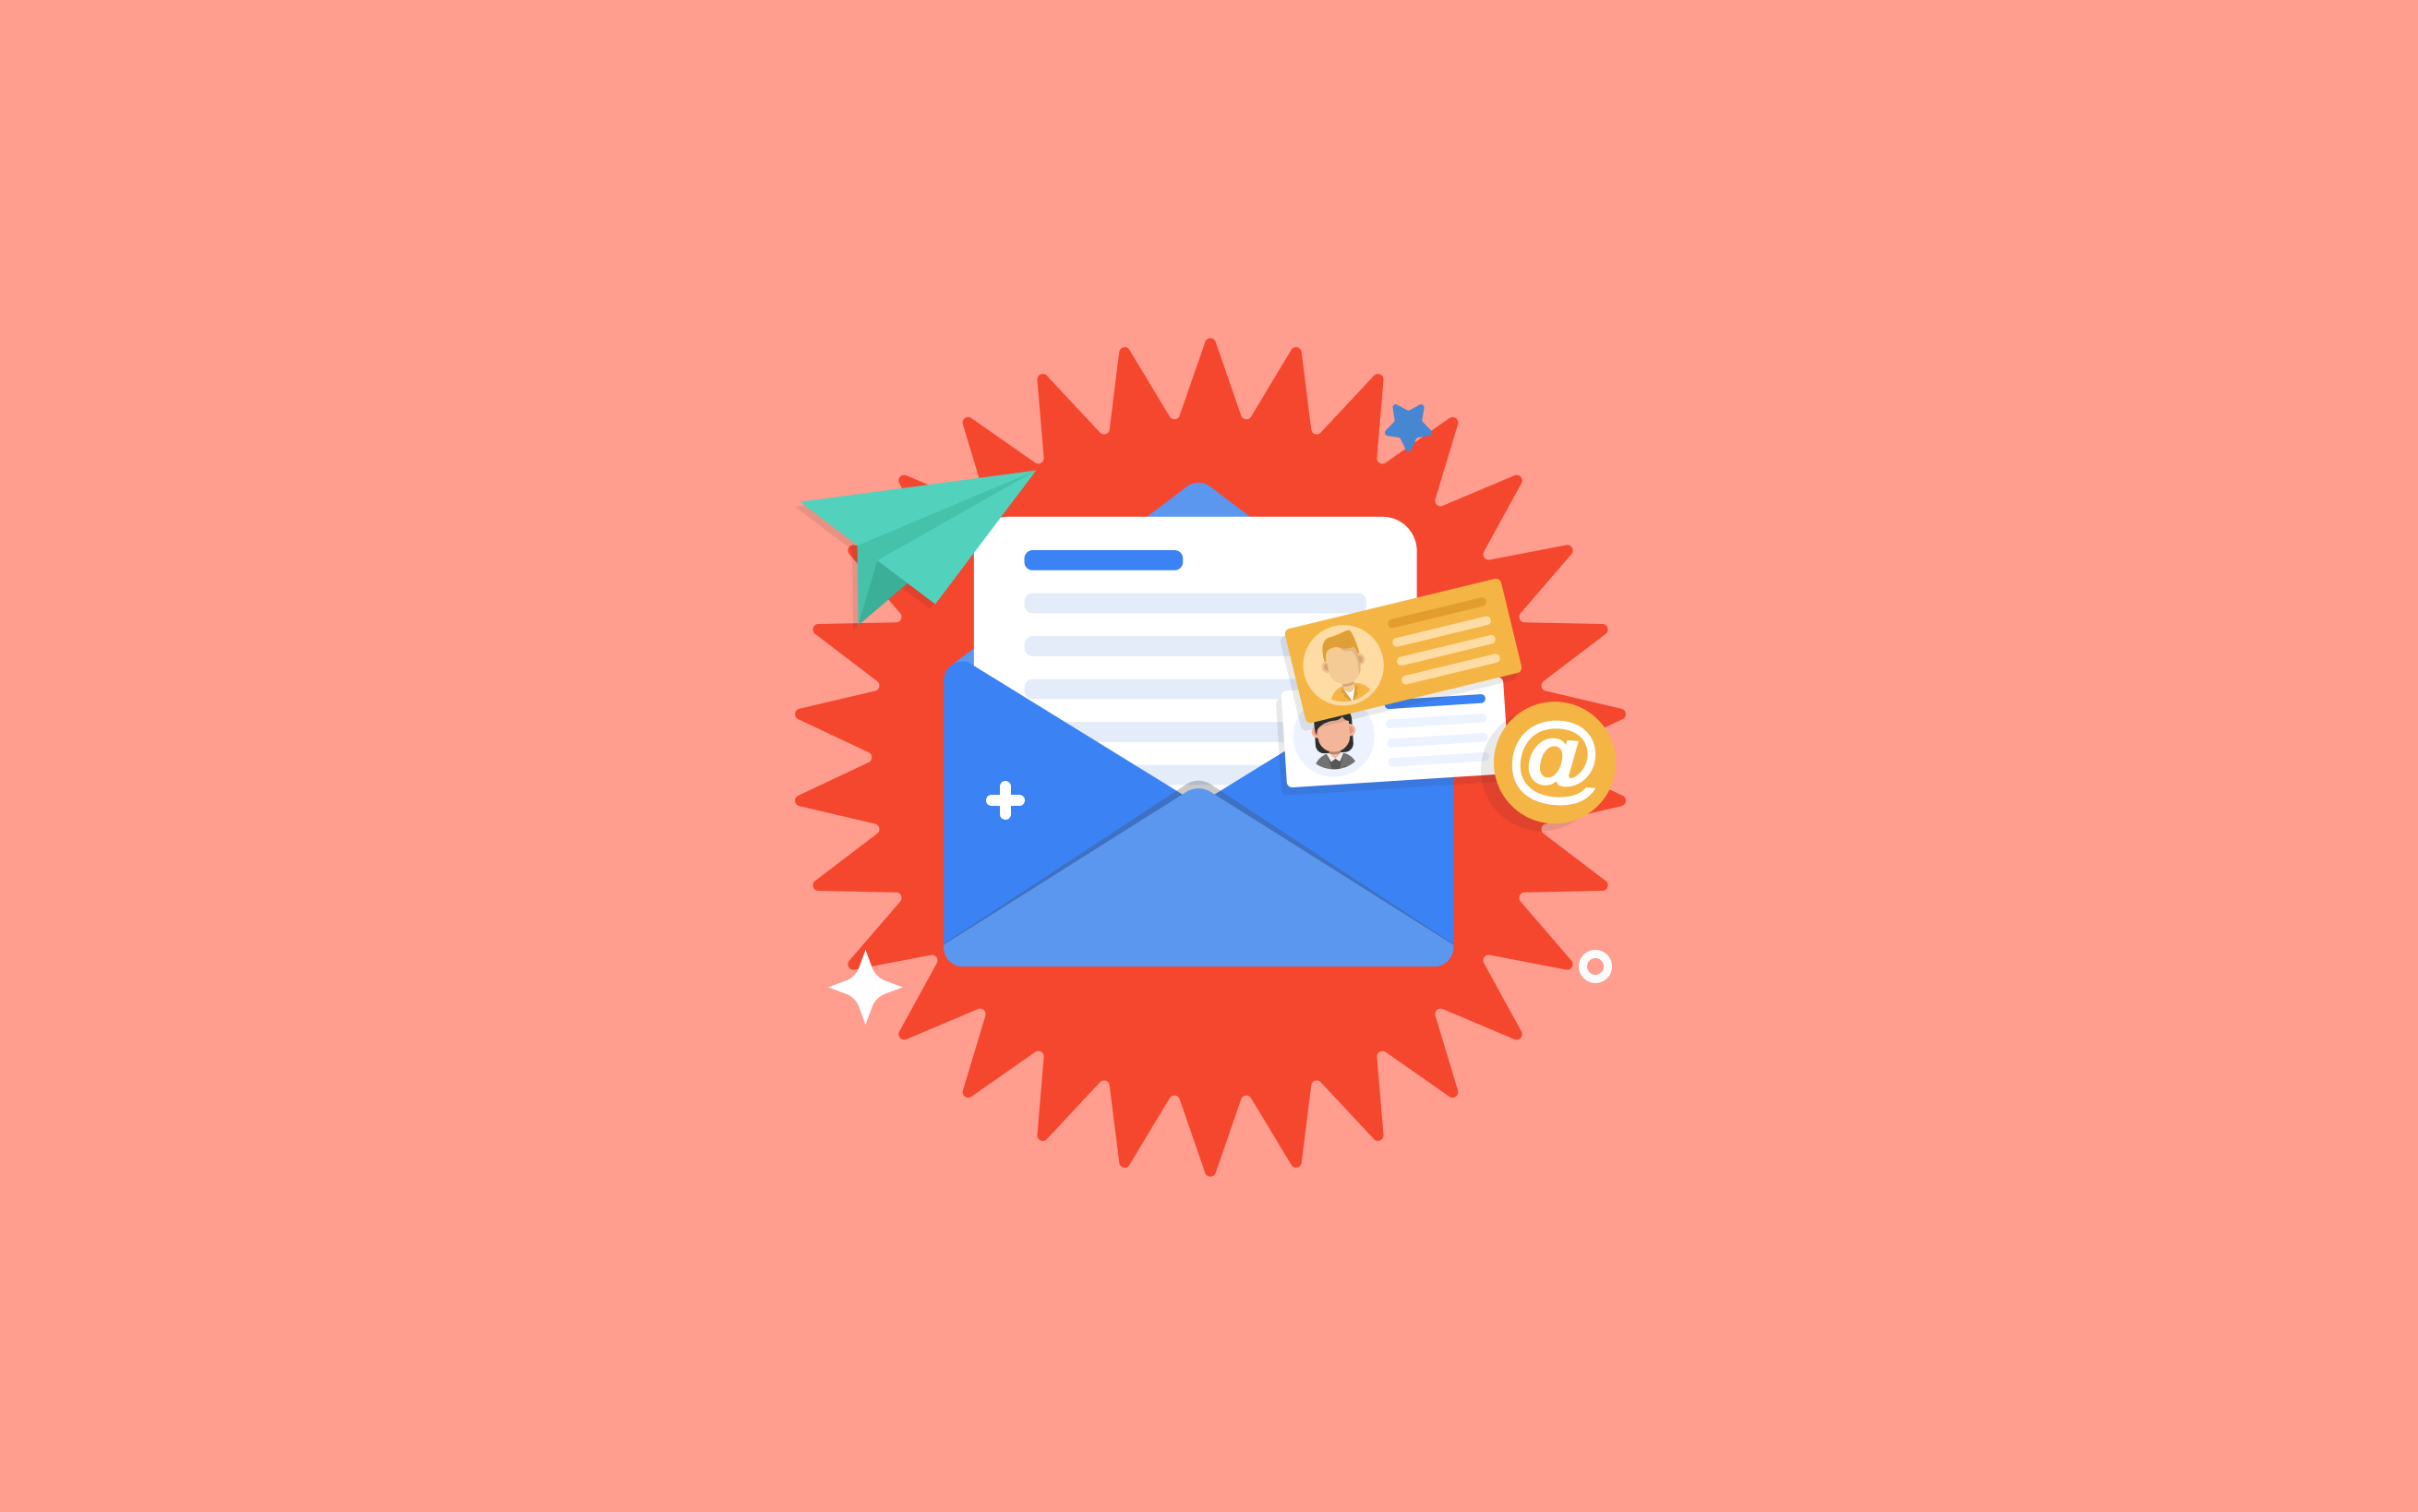 How to use personalization to get more out of your emails